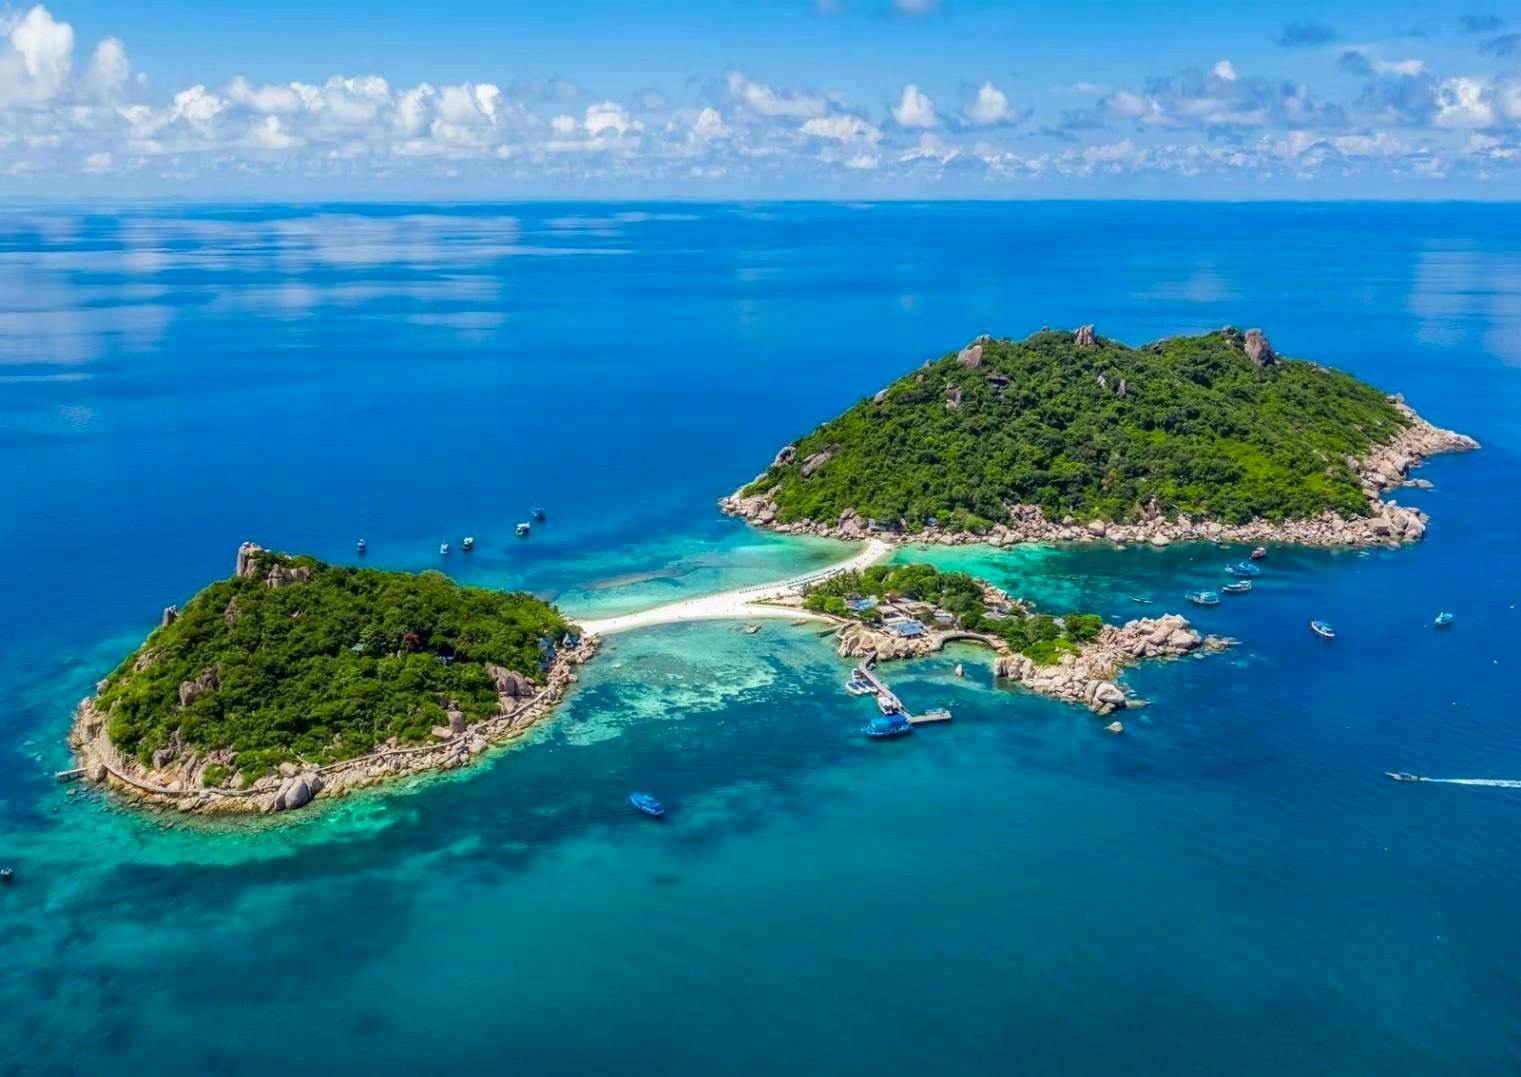 Tour of Koh Nang Yuan with hotel pickup from Tao Musement